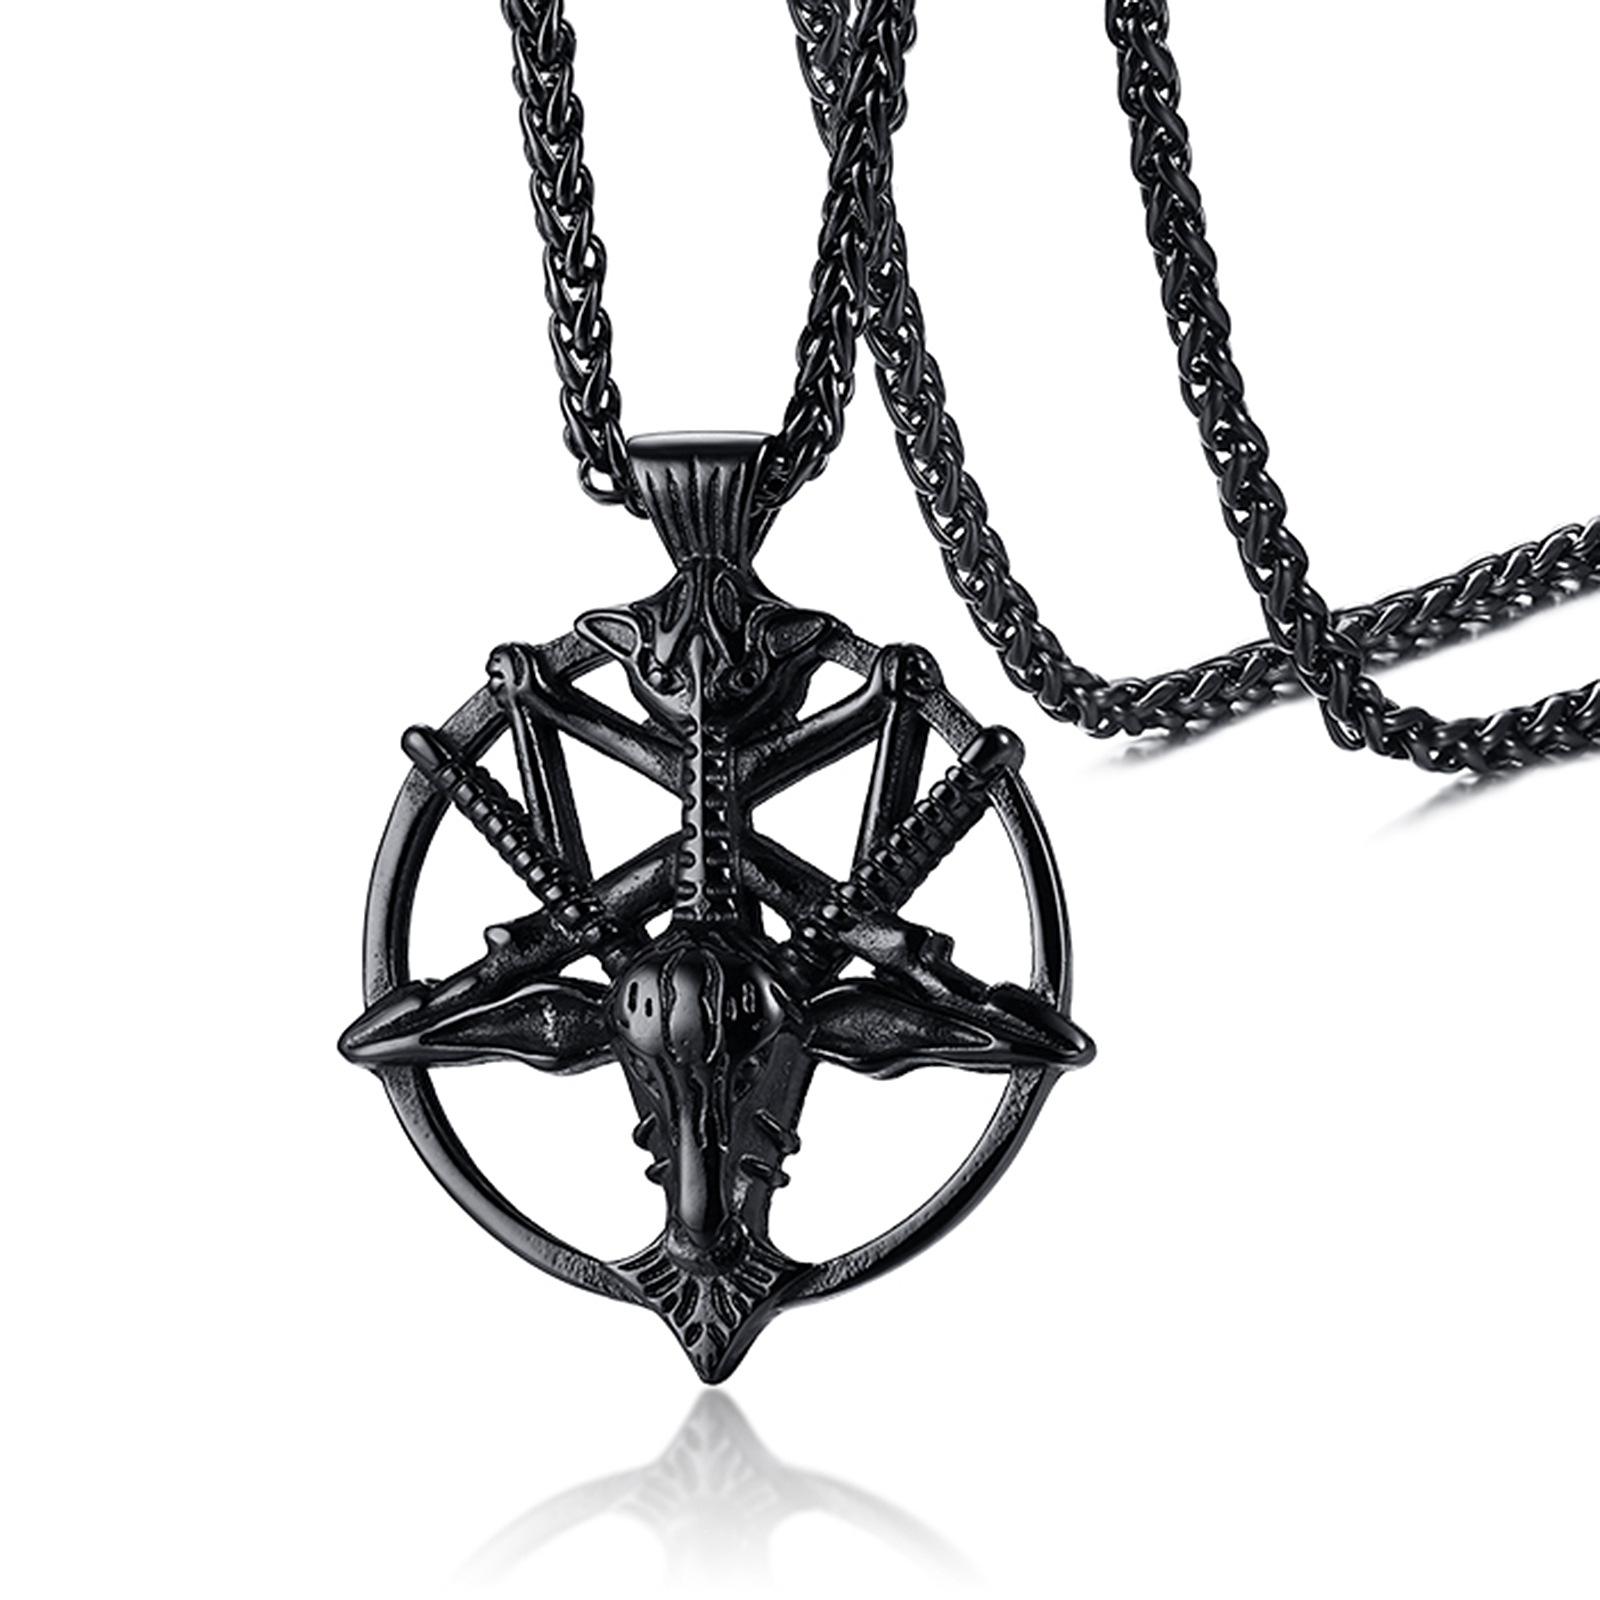 6:Black pendant with chain